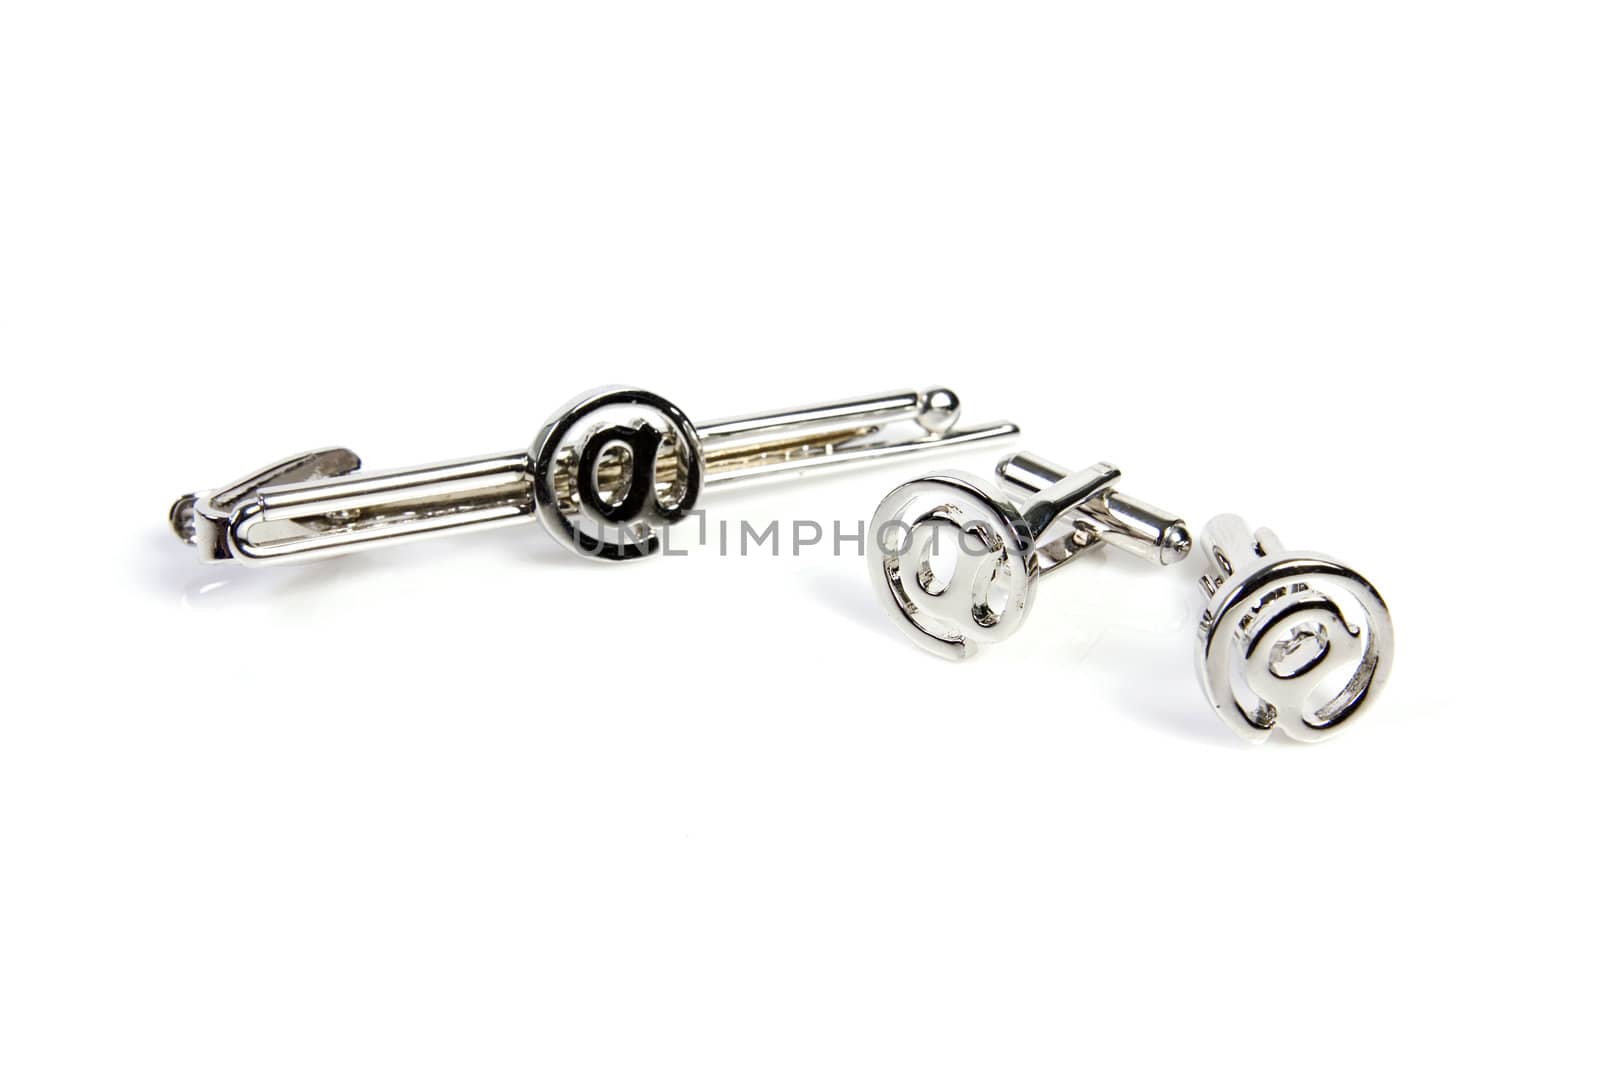 Tie clip and cufflinks formalwear accessory by posterize